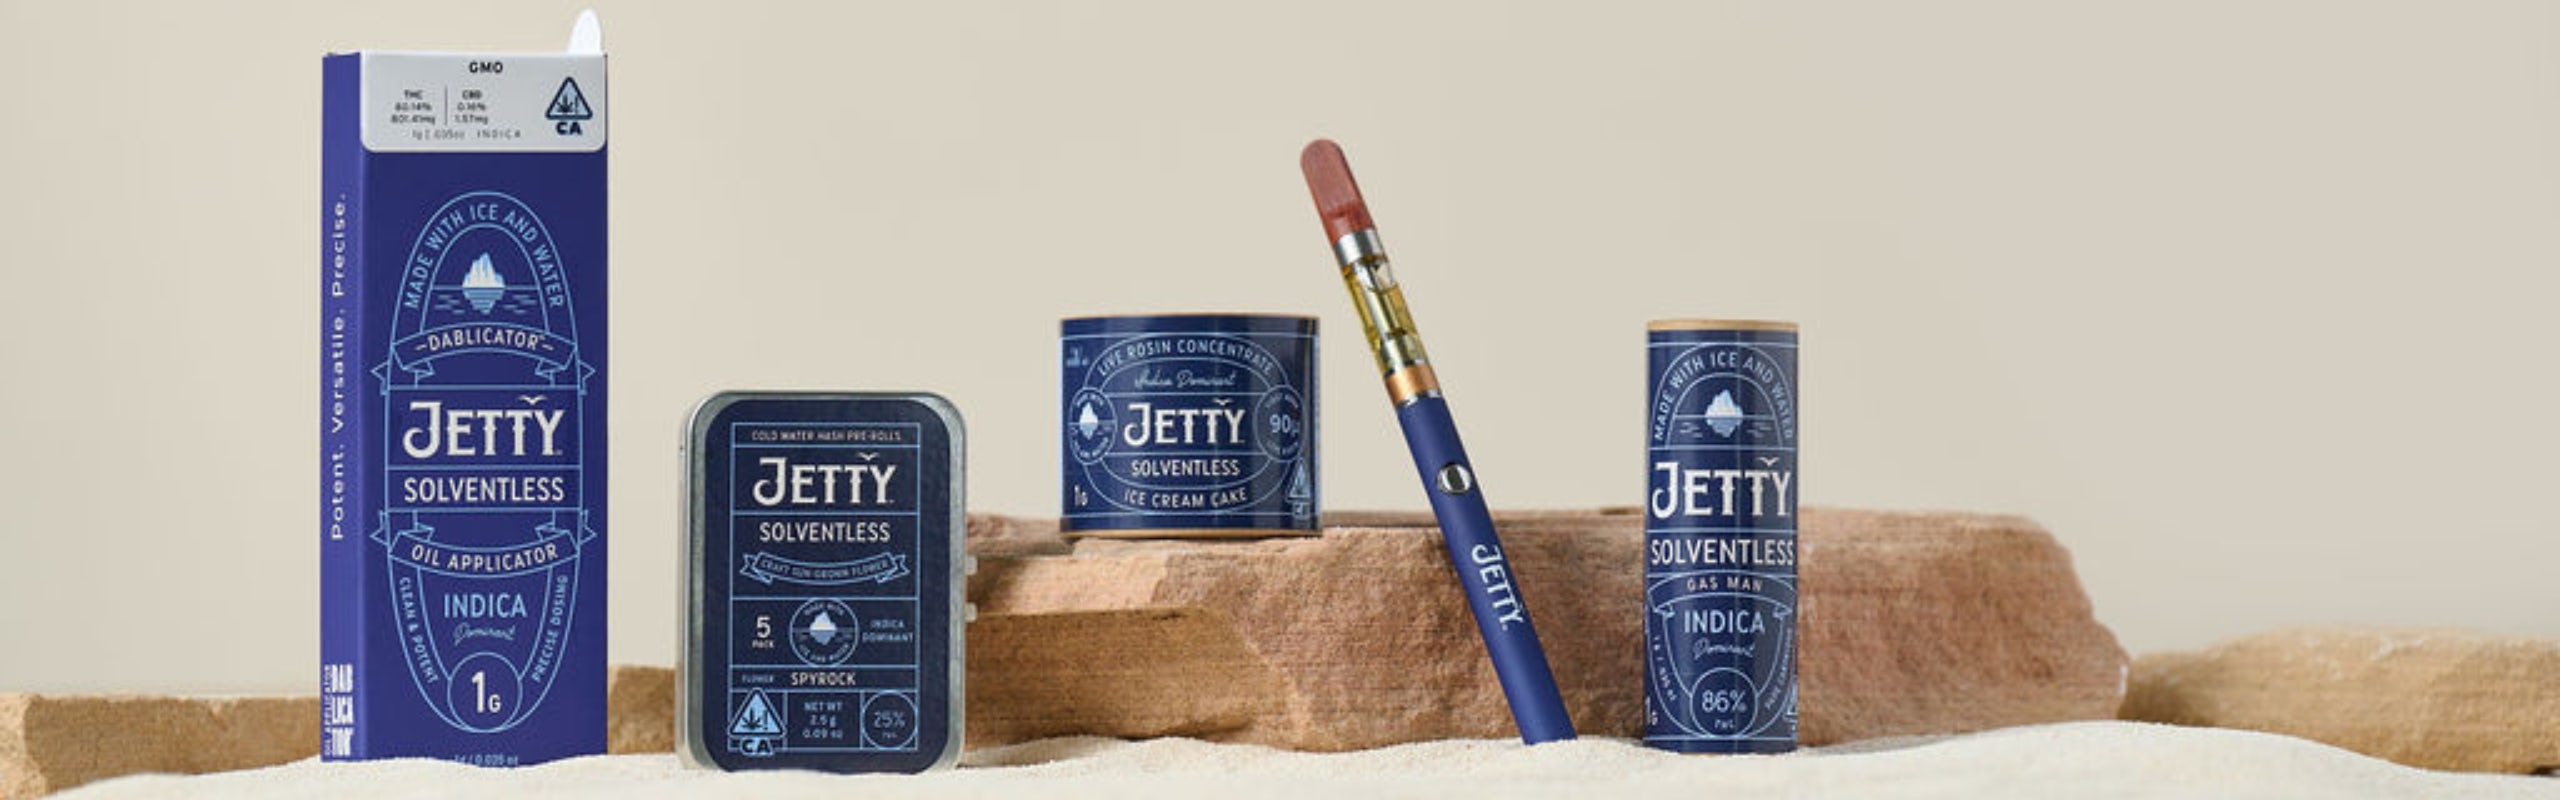 Jetty Extracts banner